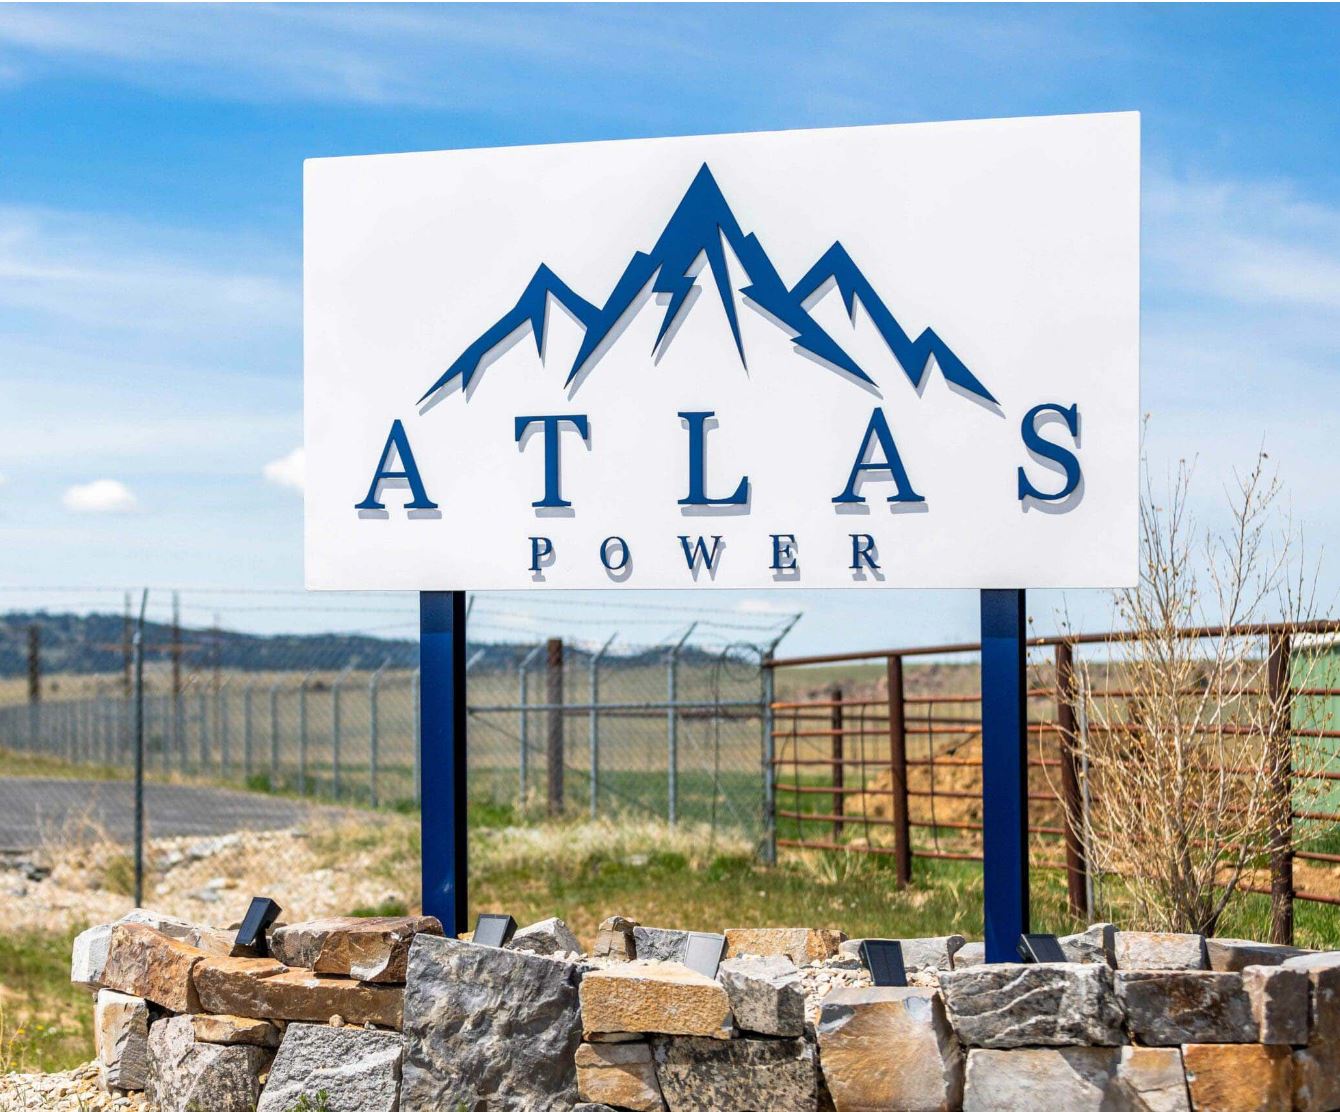 About Atlas Power